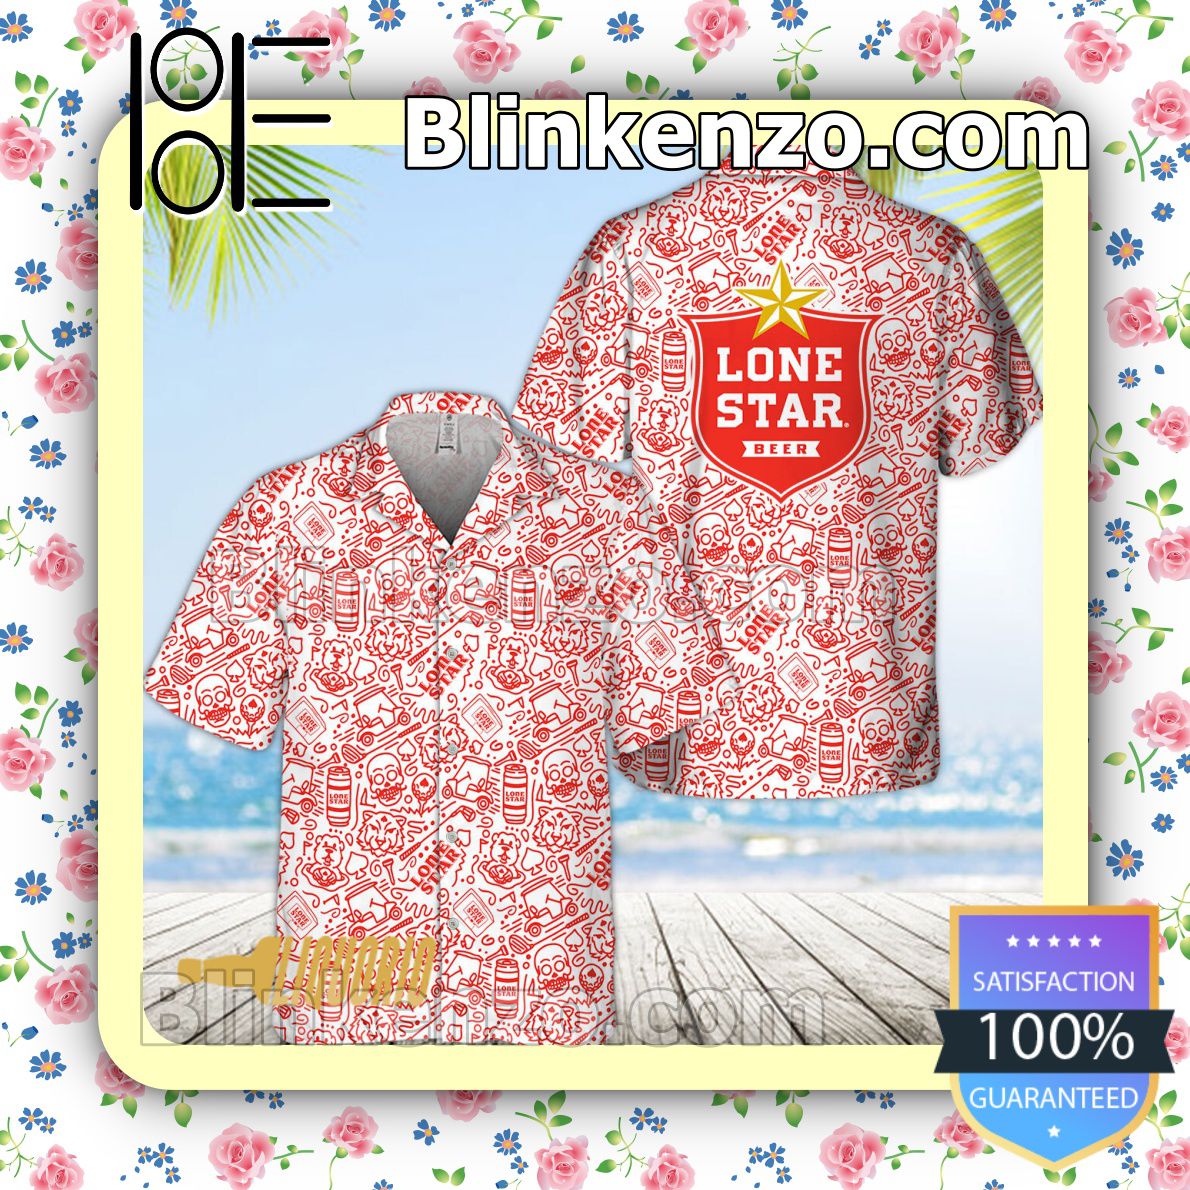 Lone Star Beer Doodle Art Beach Shirts